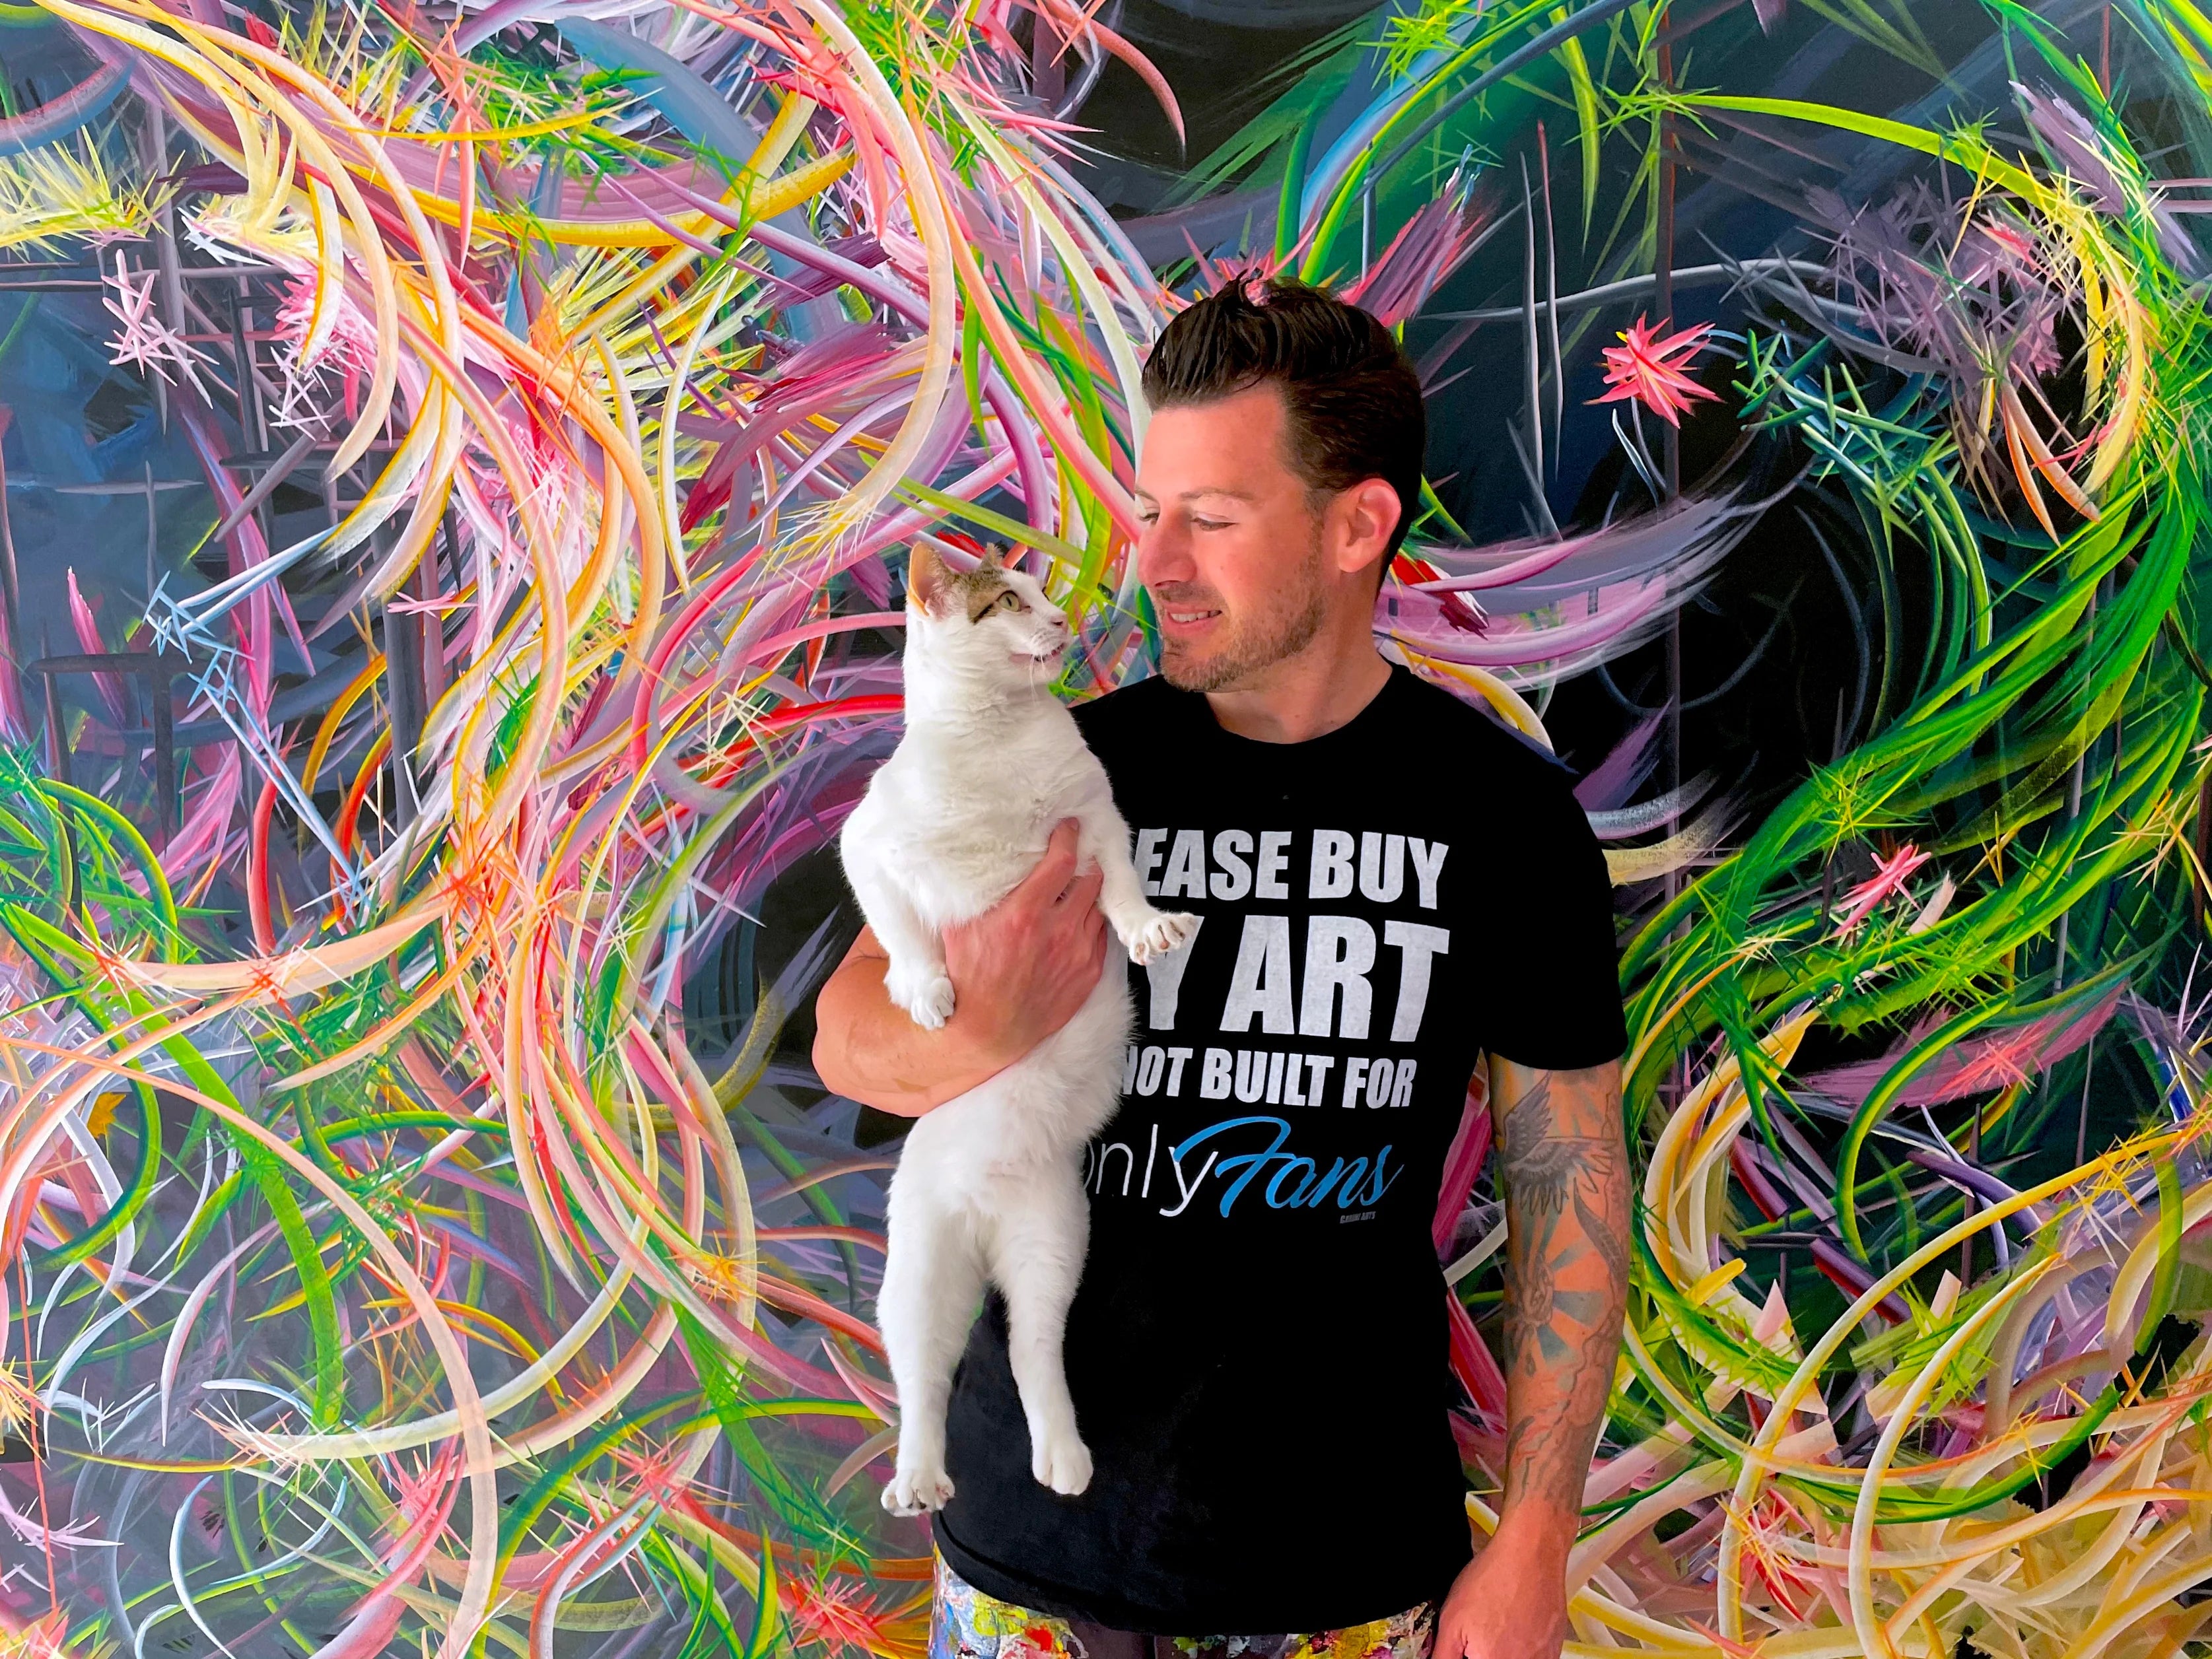 Michael Carini and his cat Braska in their studio at Carini Arts. Braska has been "Employee of the Month" for 60+ months since she walked into his life.